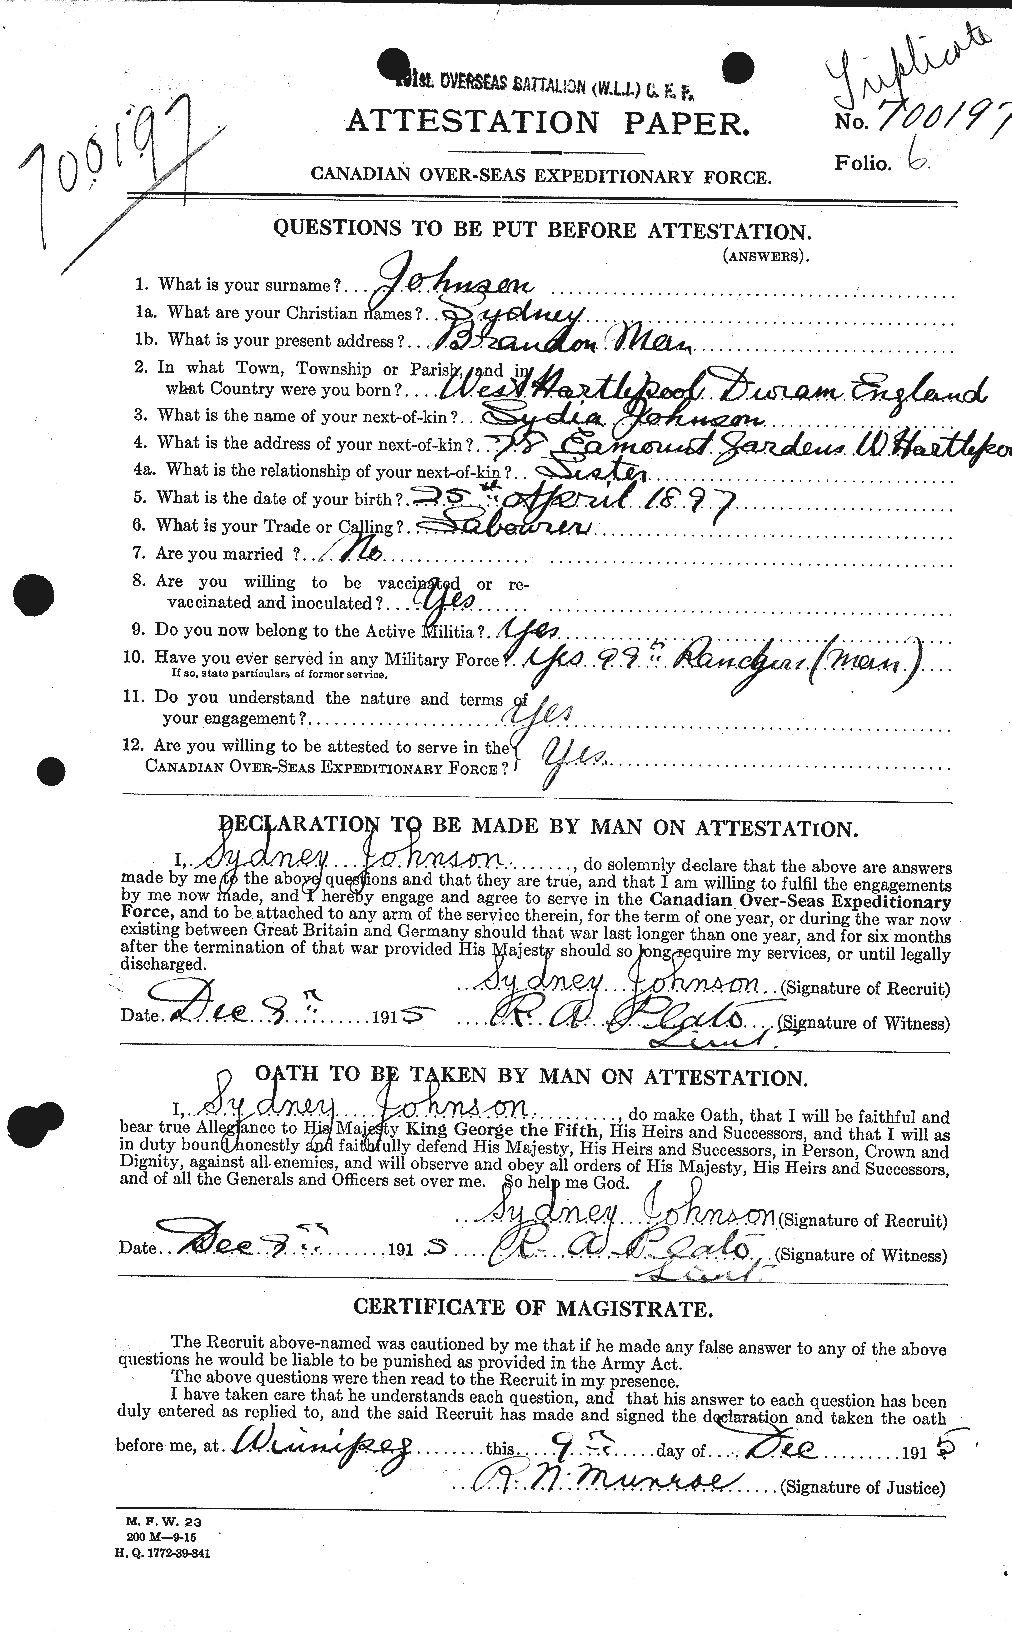 Personnel Records of the First World War - CEF 417486a